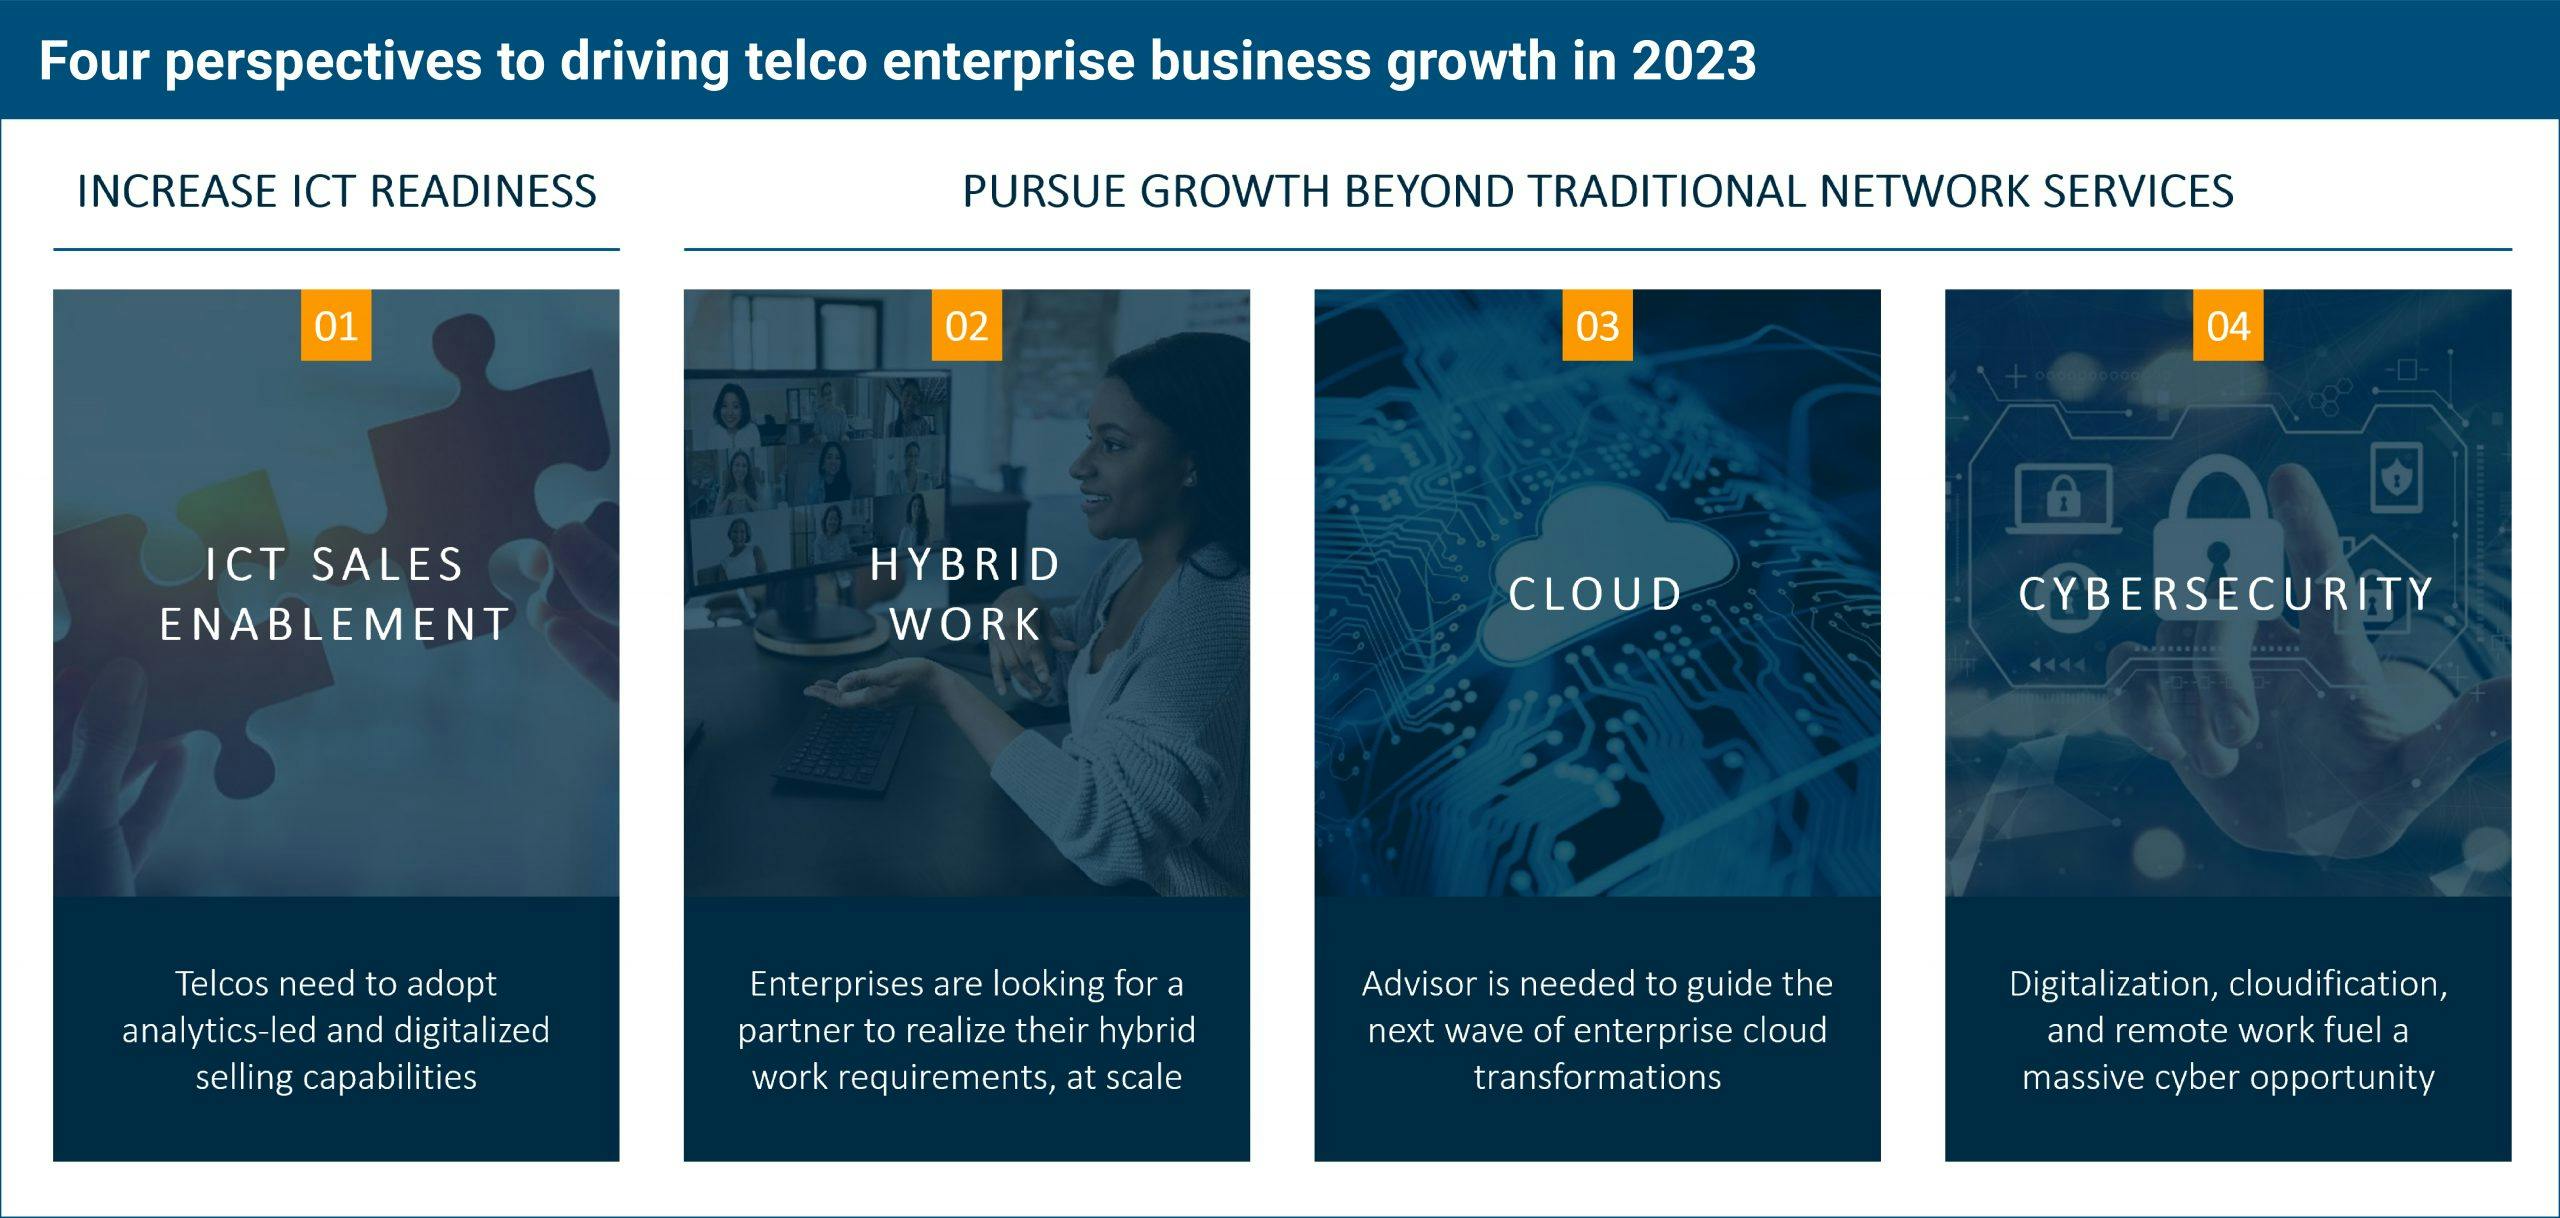 Illustration #3. Four perspectives on driving enterprise business growth in 2023